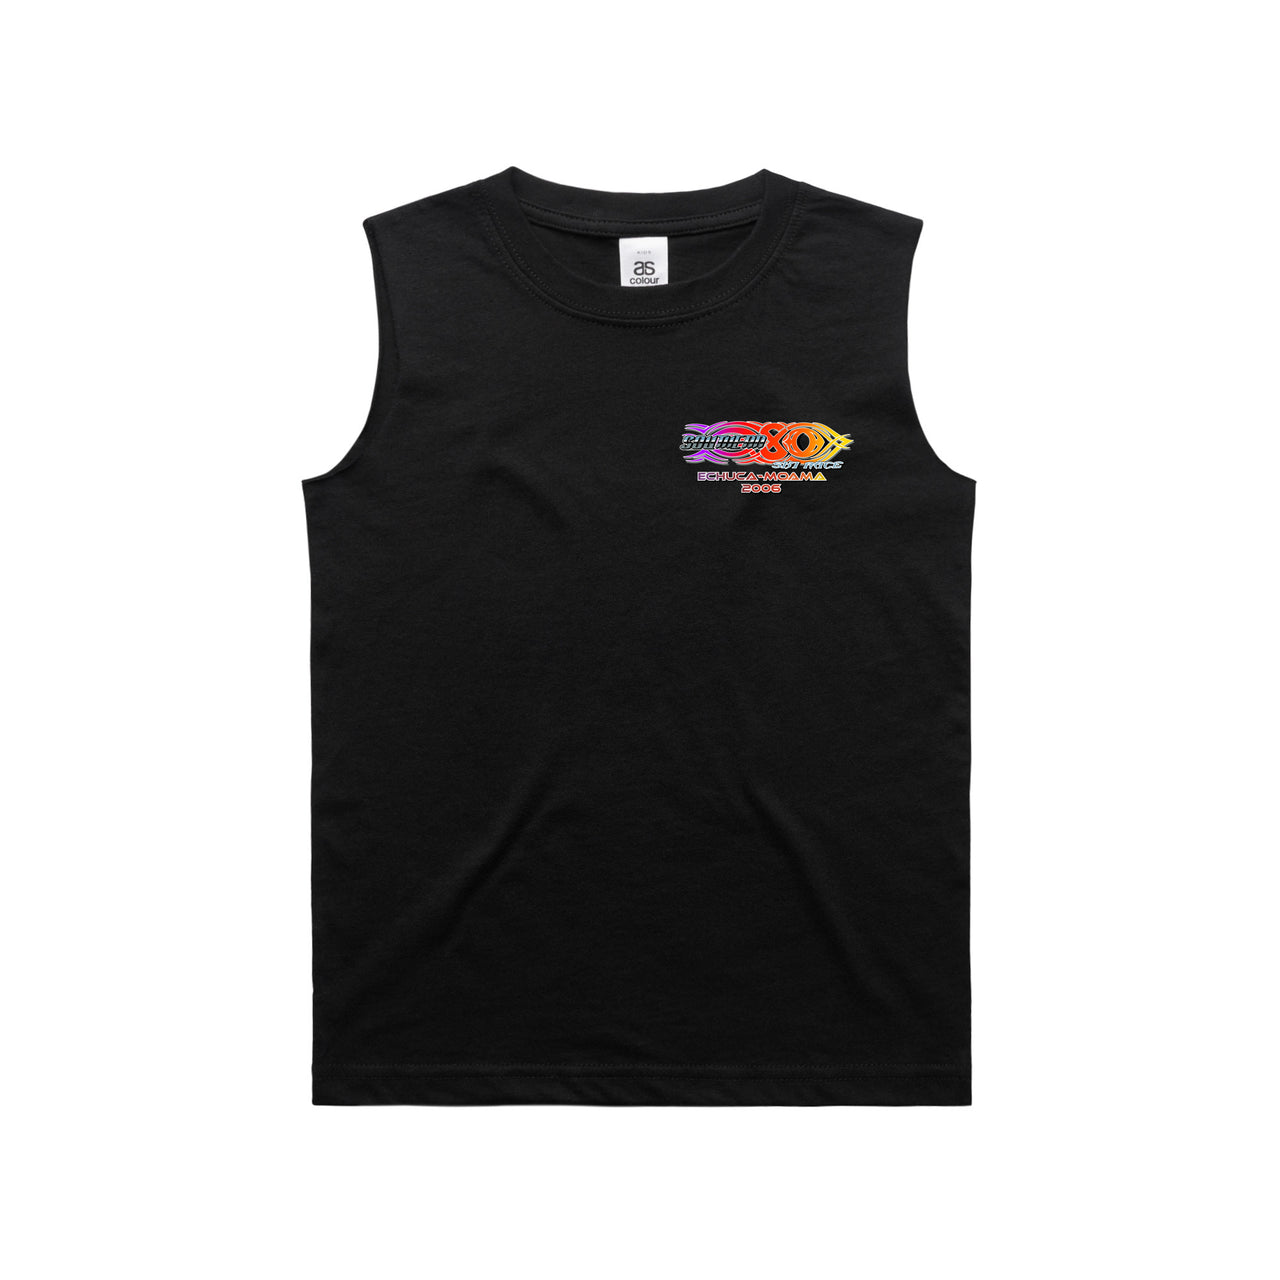 S80 2006 Hellbent Event Youth/Kids Tank